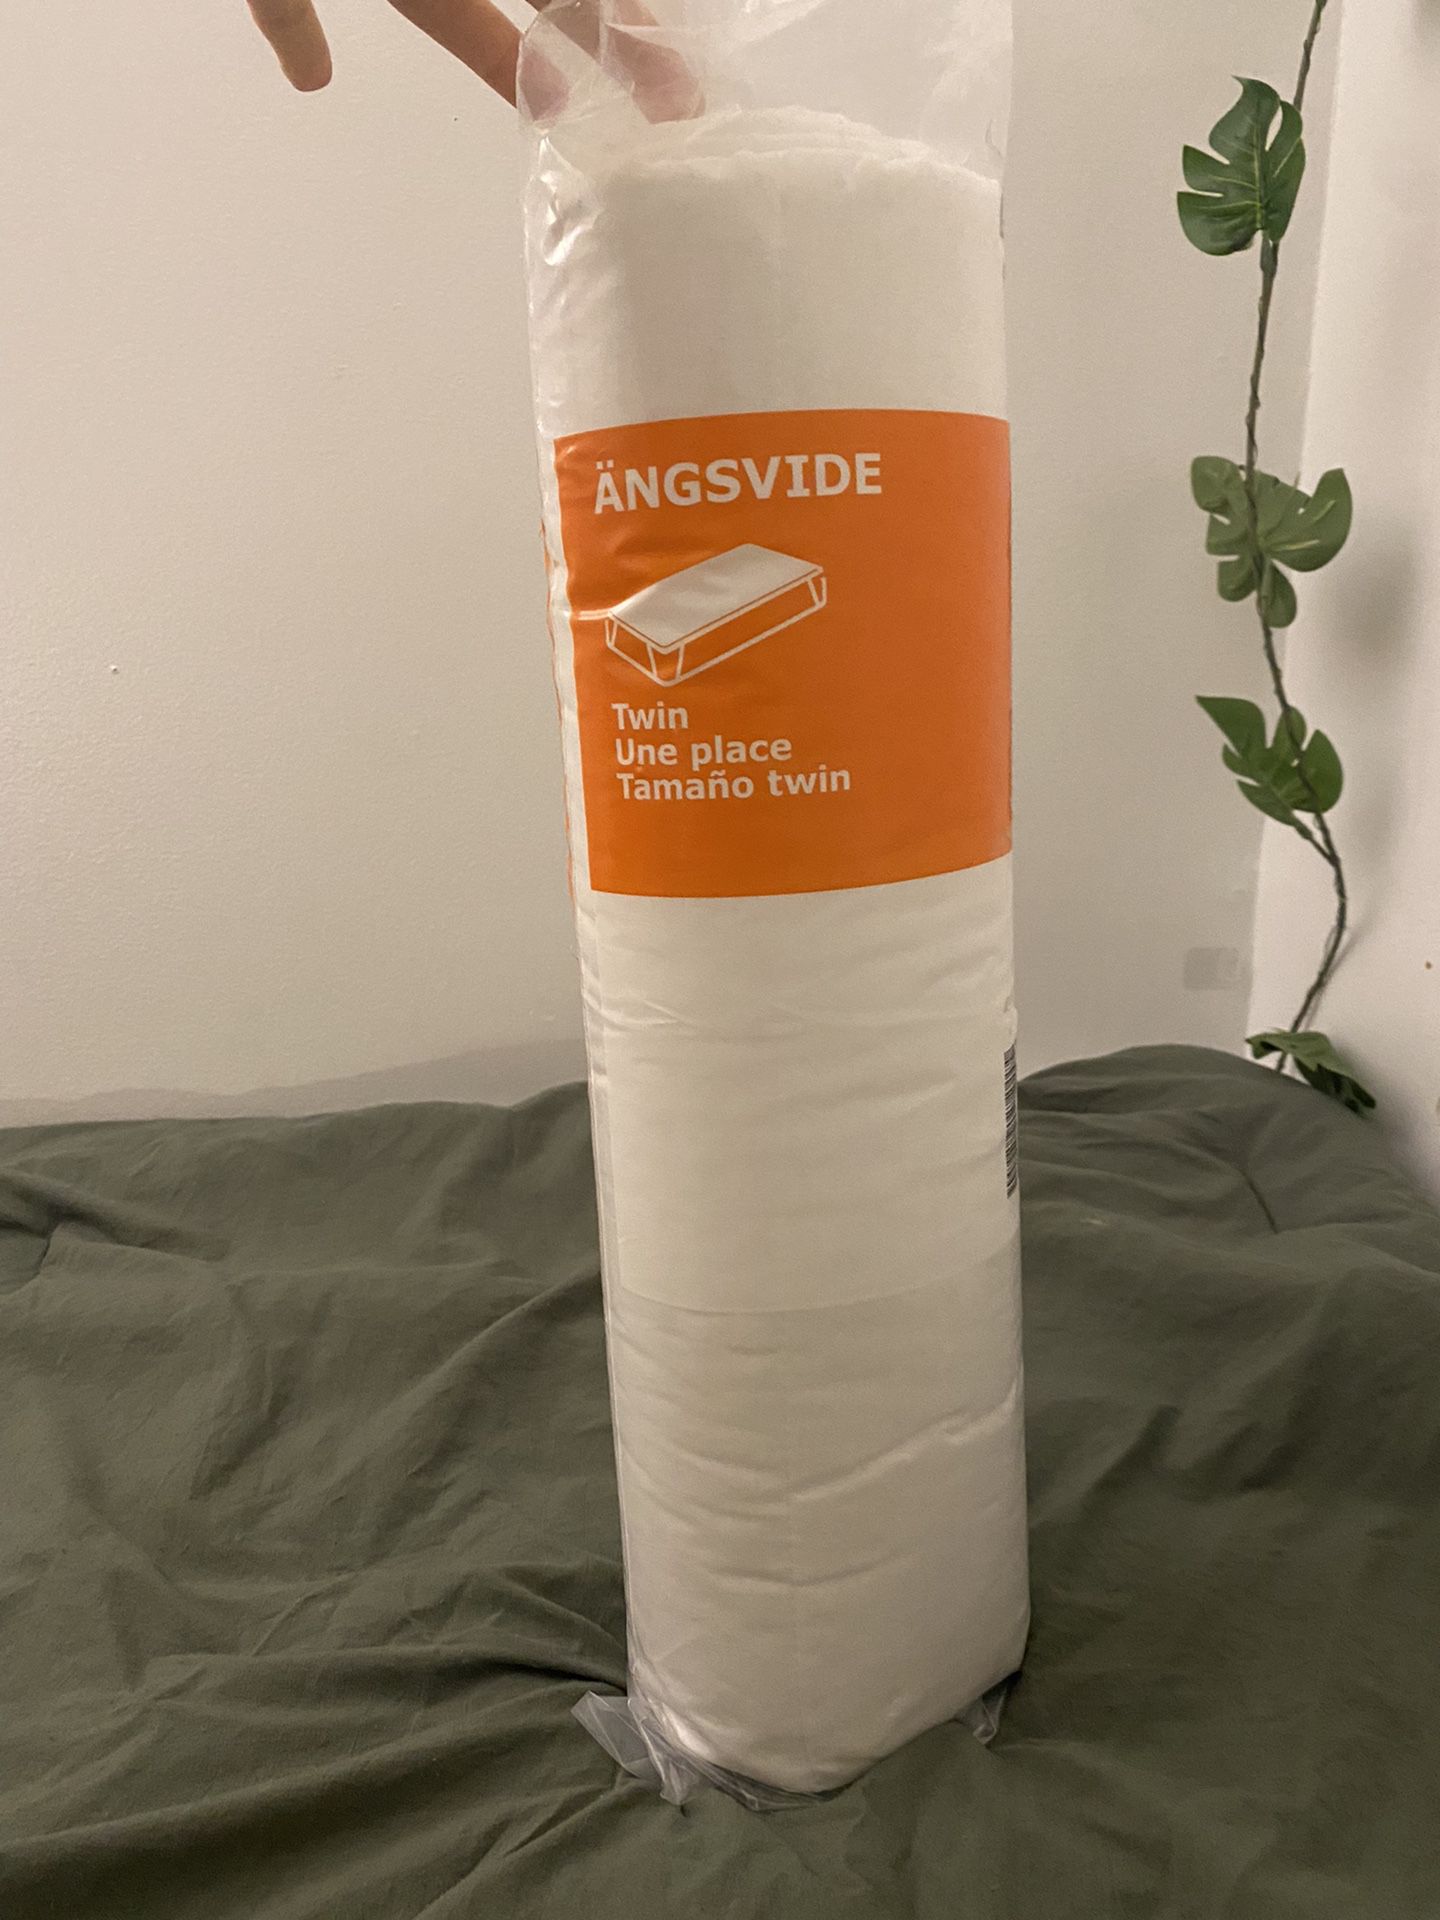 Ikea Angsvide Or Angskorn Mattress Protector Twin Size